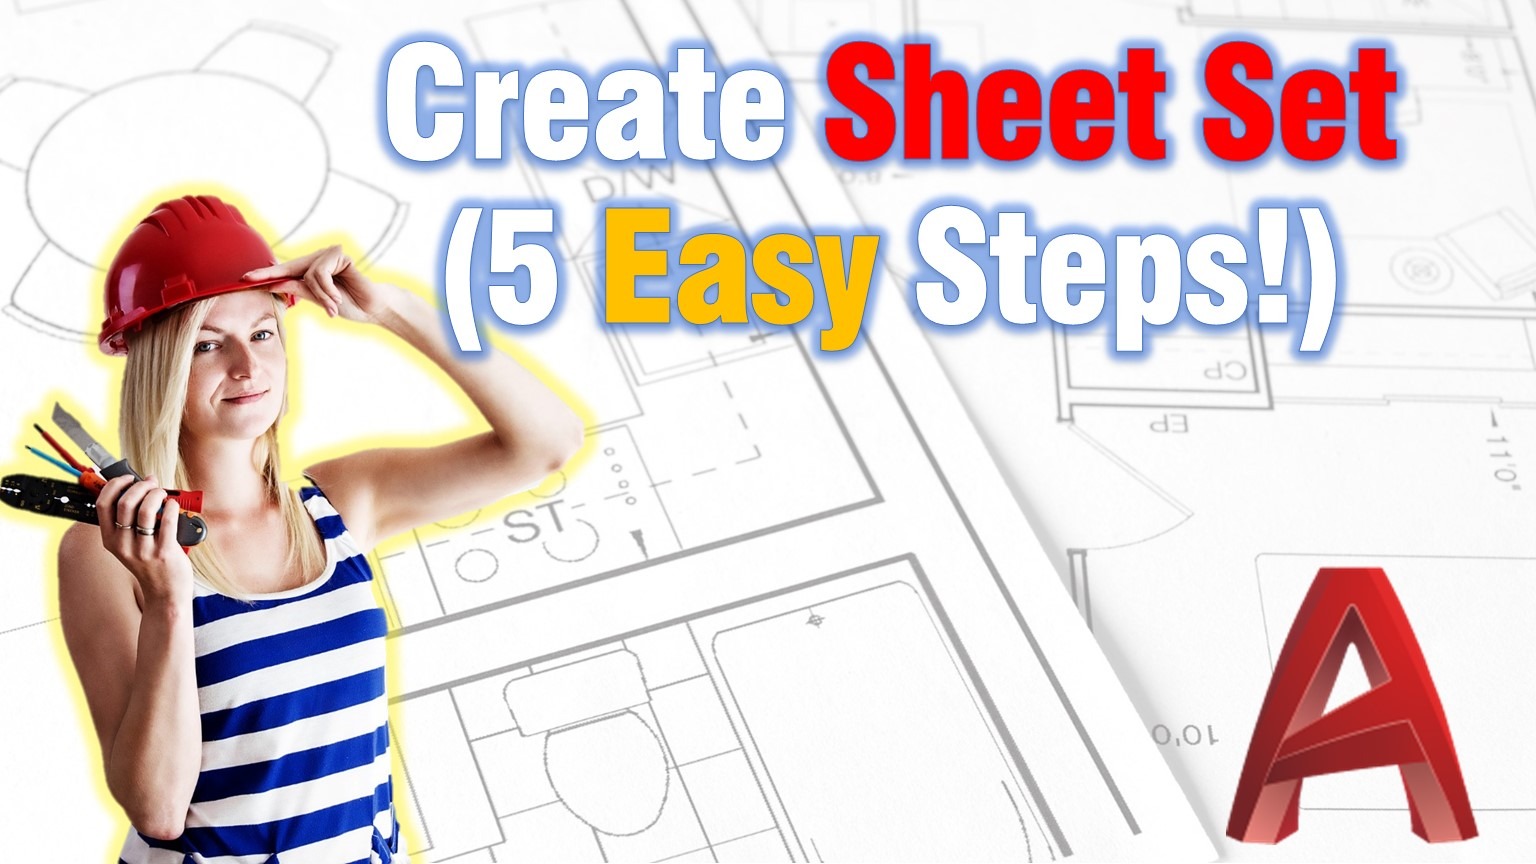 Learn how to Create Sheet Sets